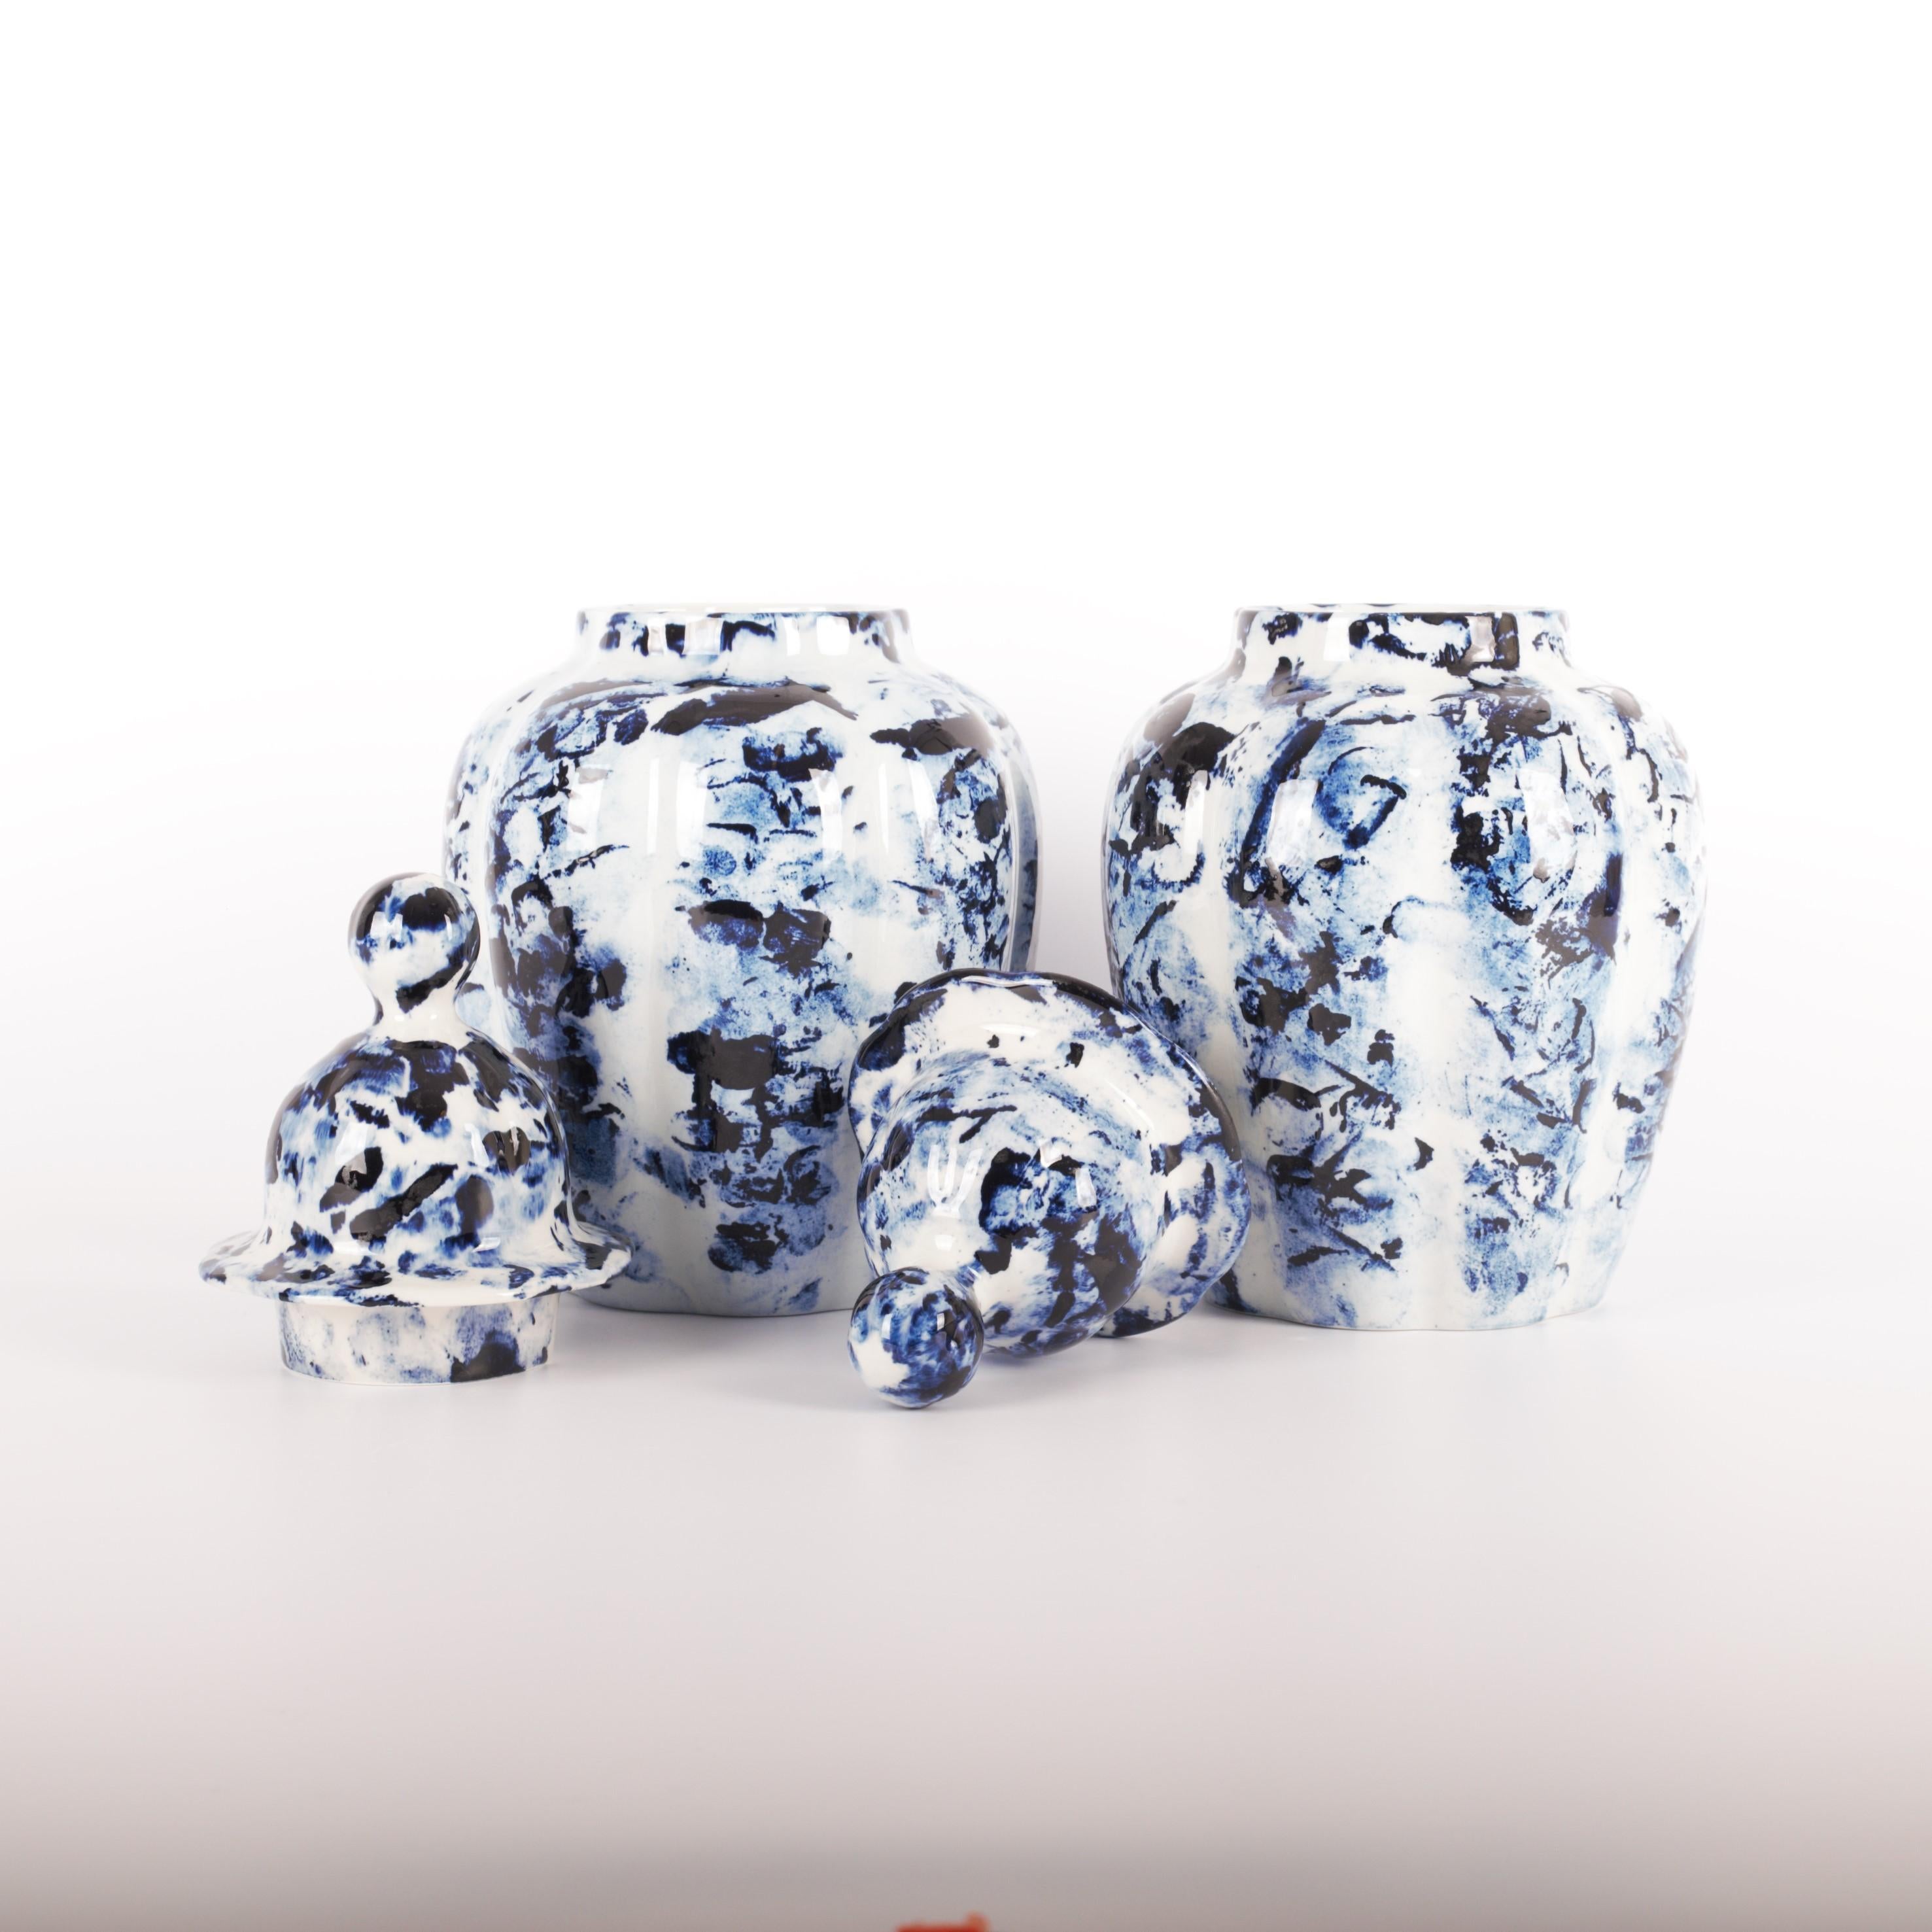 Glazed Delft Blue Set of 2 Vase with Lid, by Marcel Wanders, Hand Painted, 2006, Unique For Sale